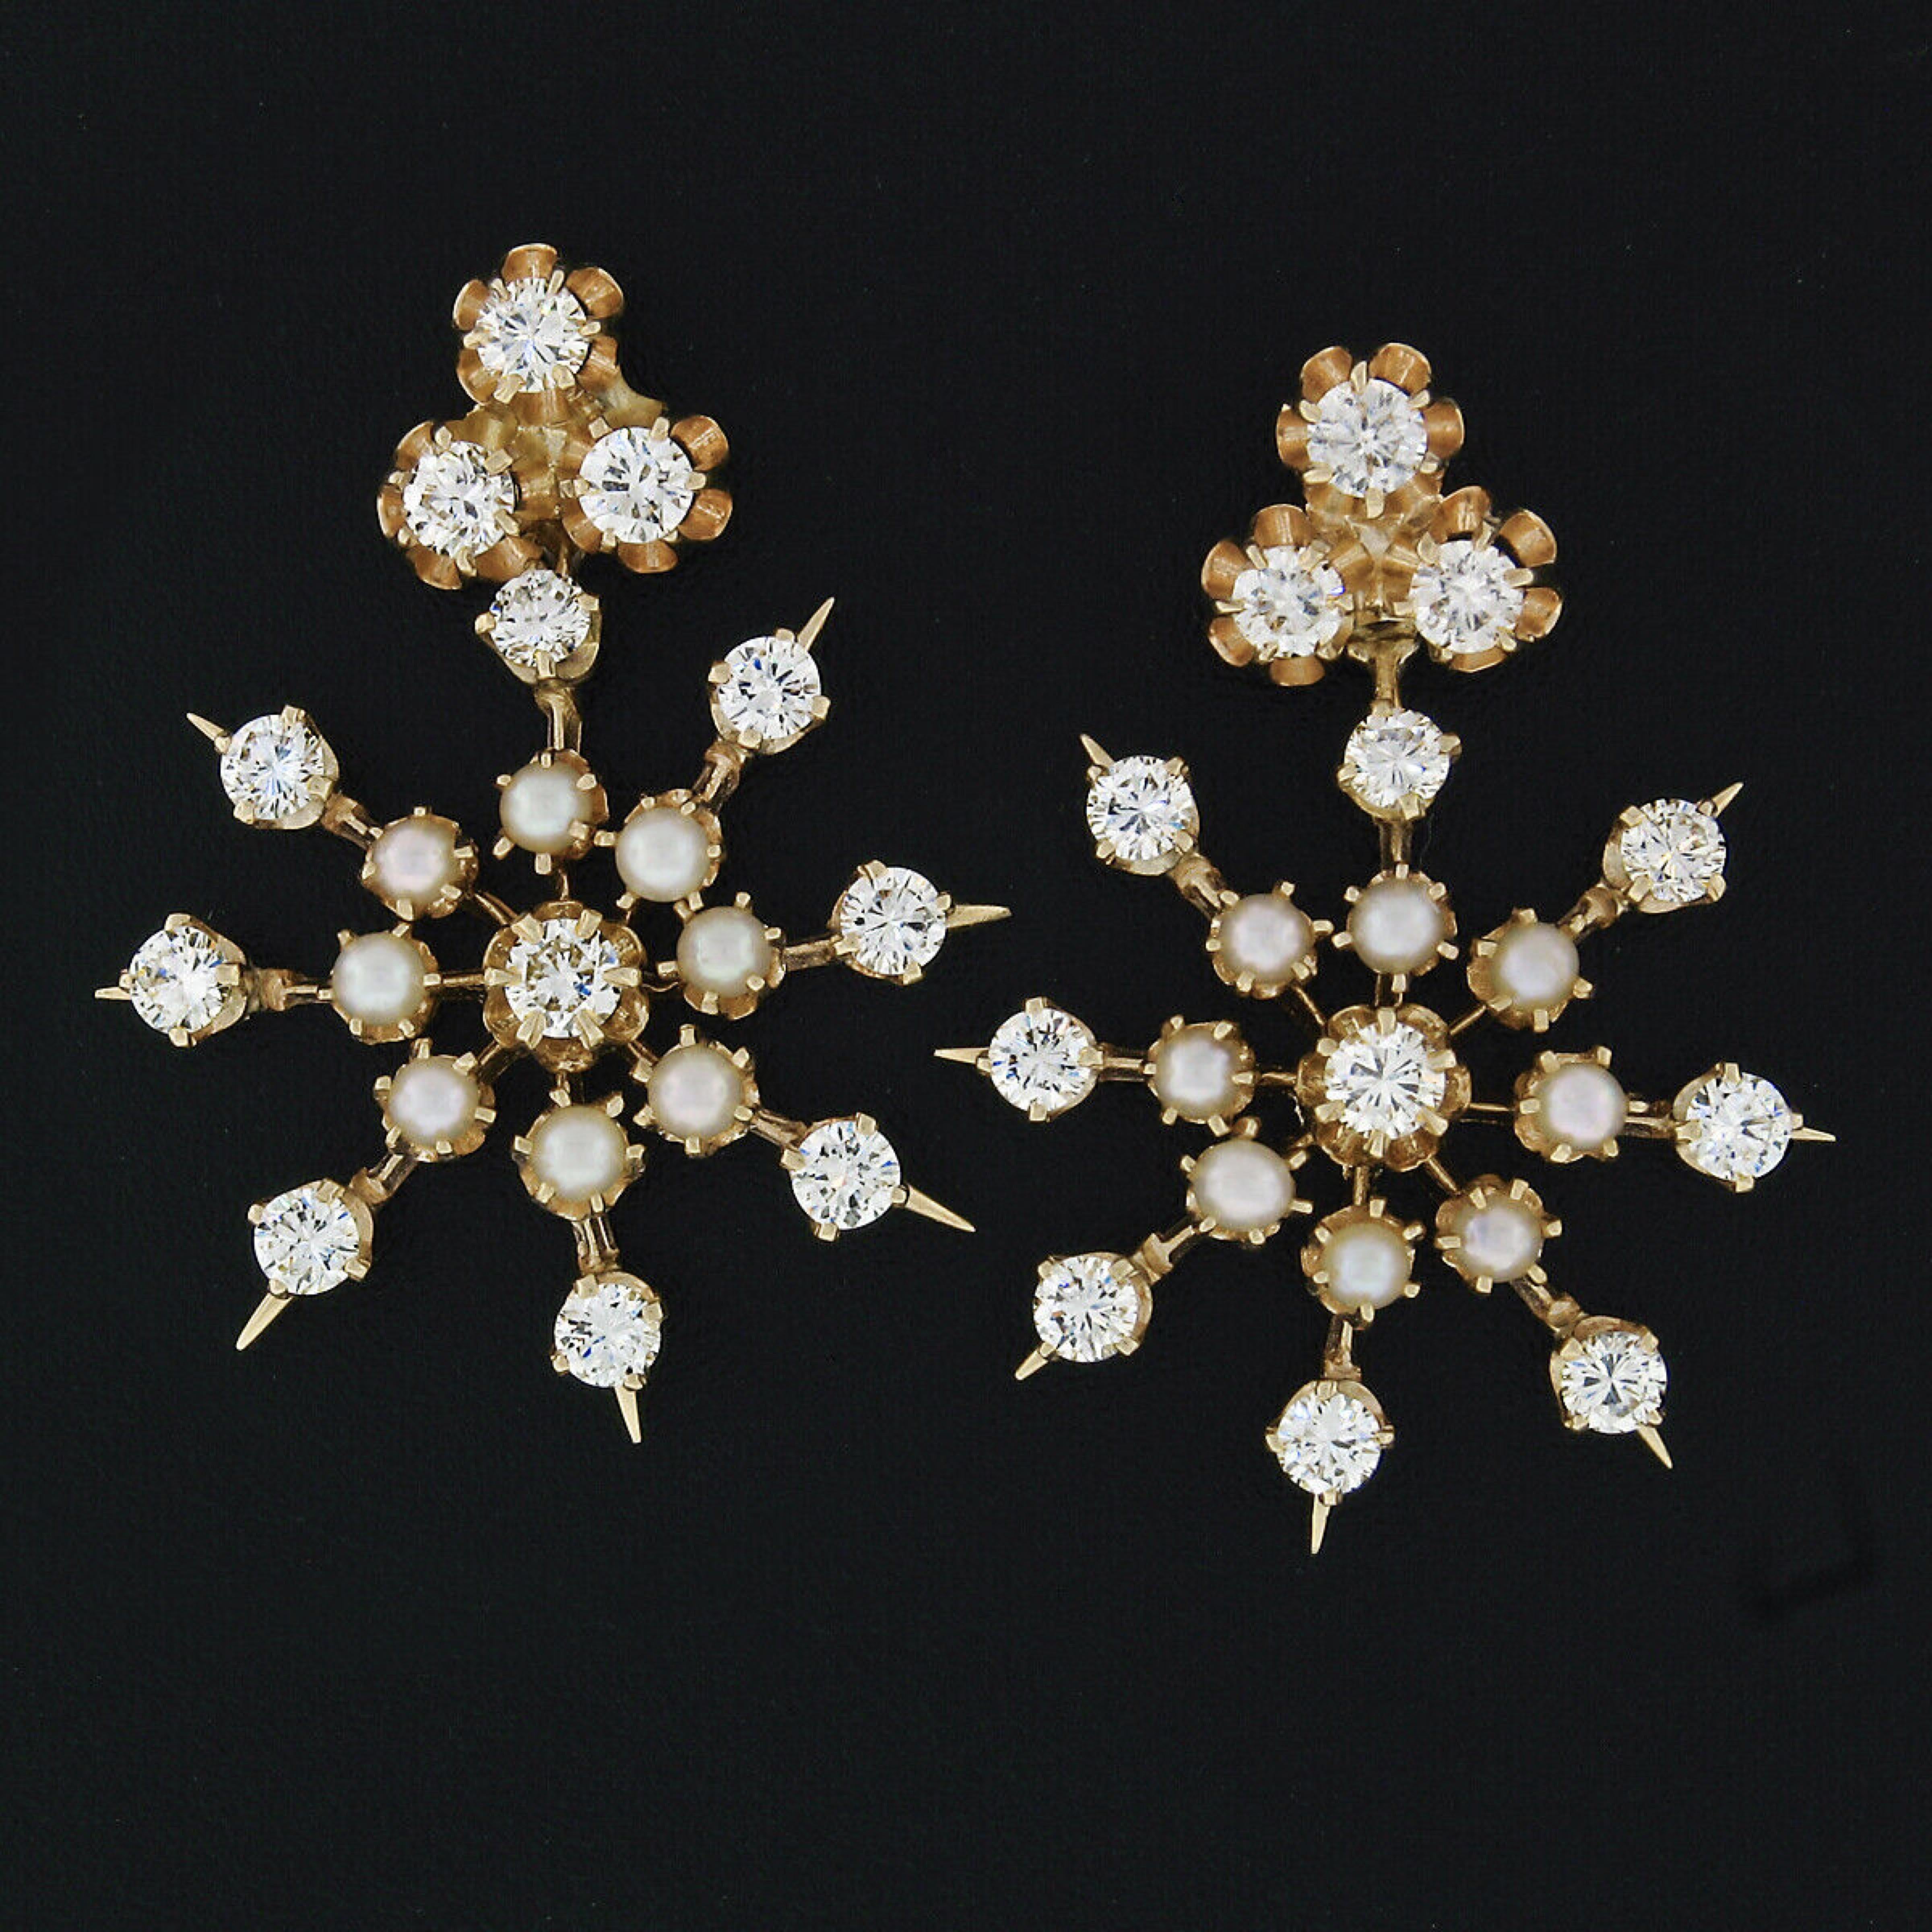 Here we have a beautiful vintage pair of diamond and pearl cluster earrings crafted from solid 14k yellow gold. The earrings feature simple diamond studs constructed from 3 stones each prong set in buttercup-style baskets. Also, from those simple